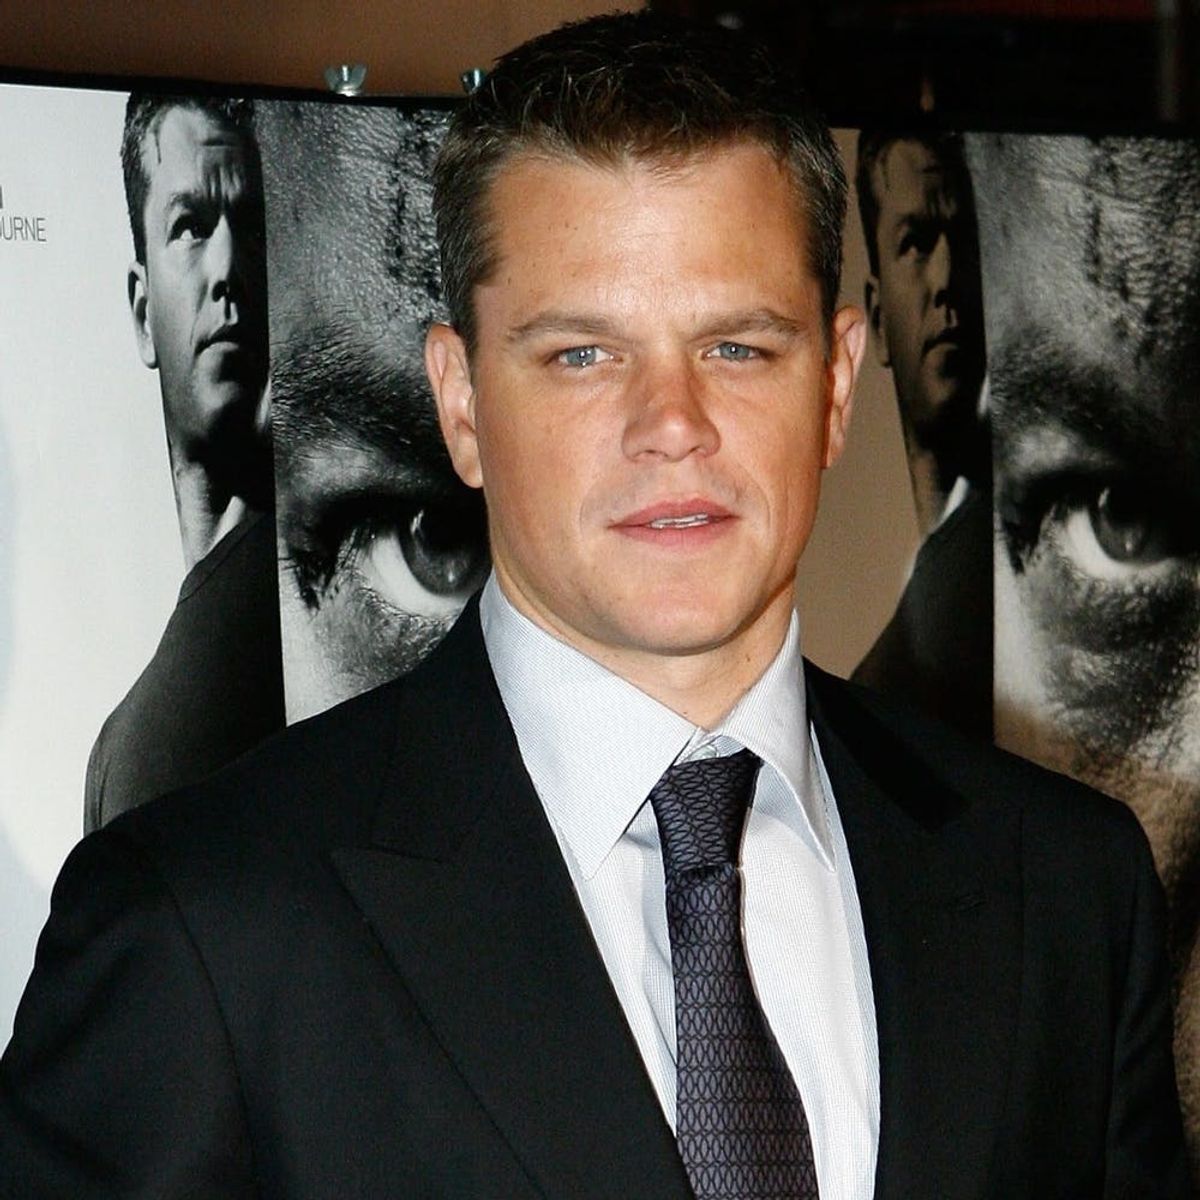 ‘The Bourne Ultimatum’ Is Coming to Netflix in May